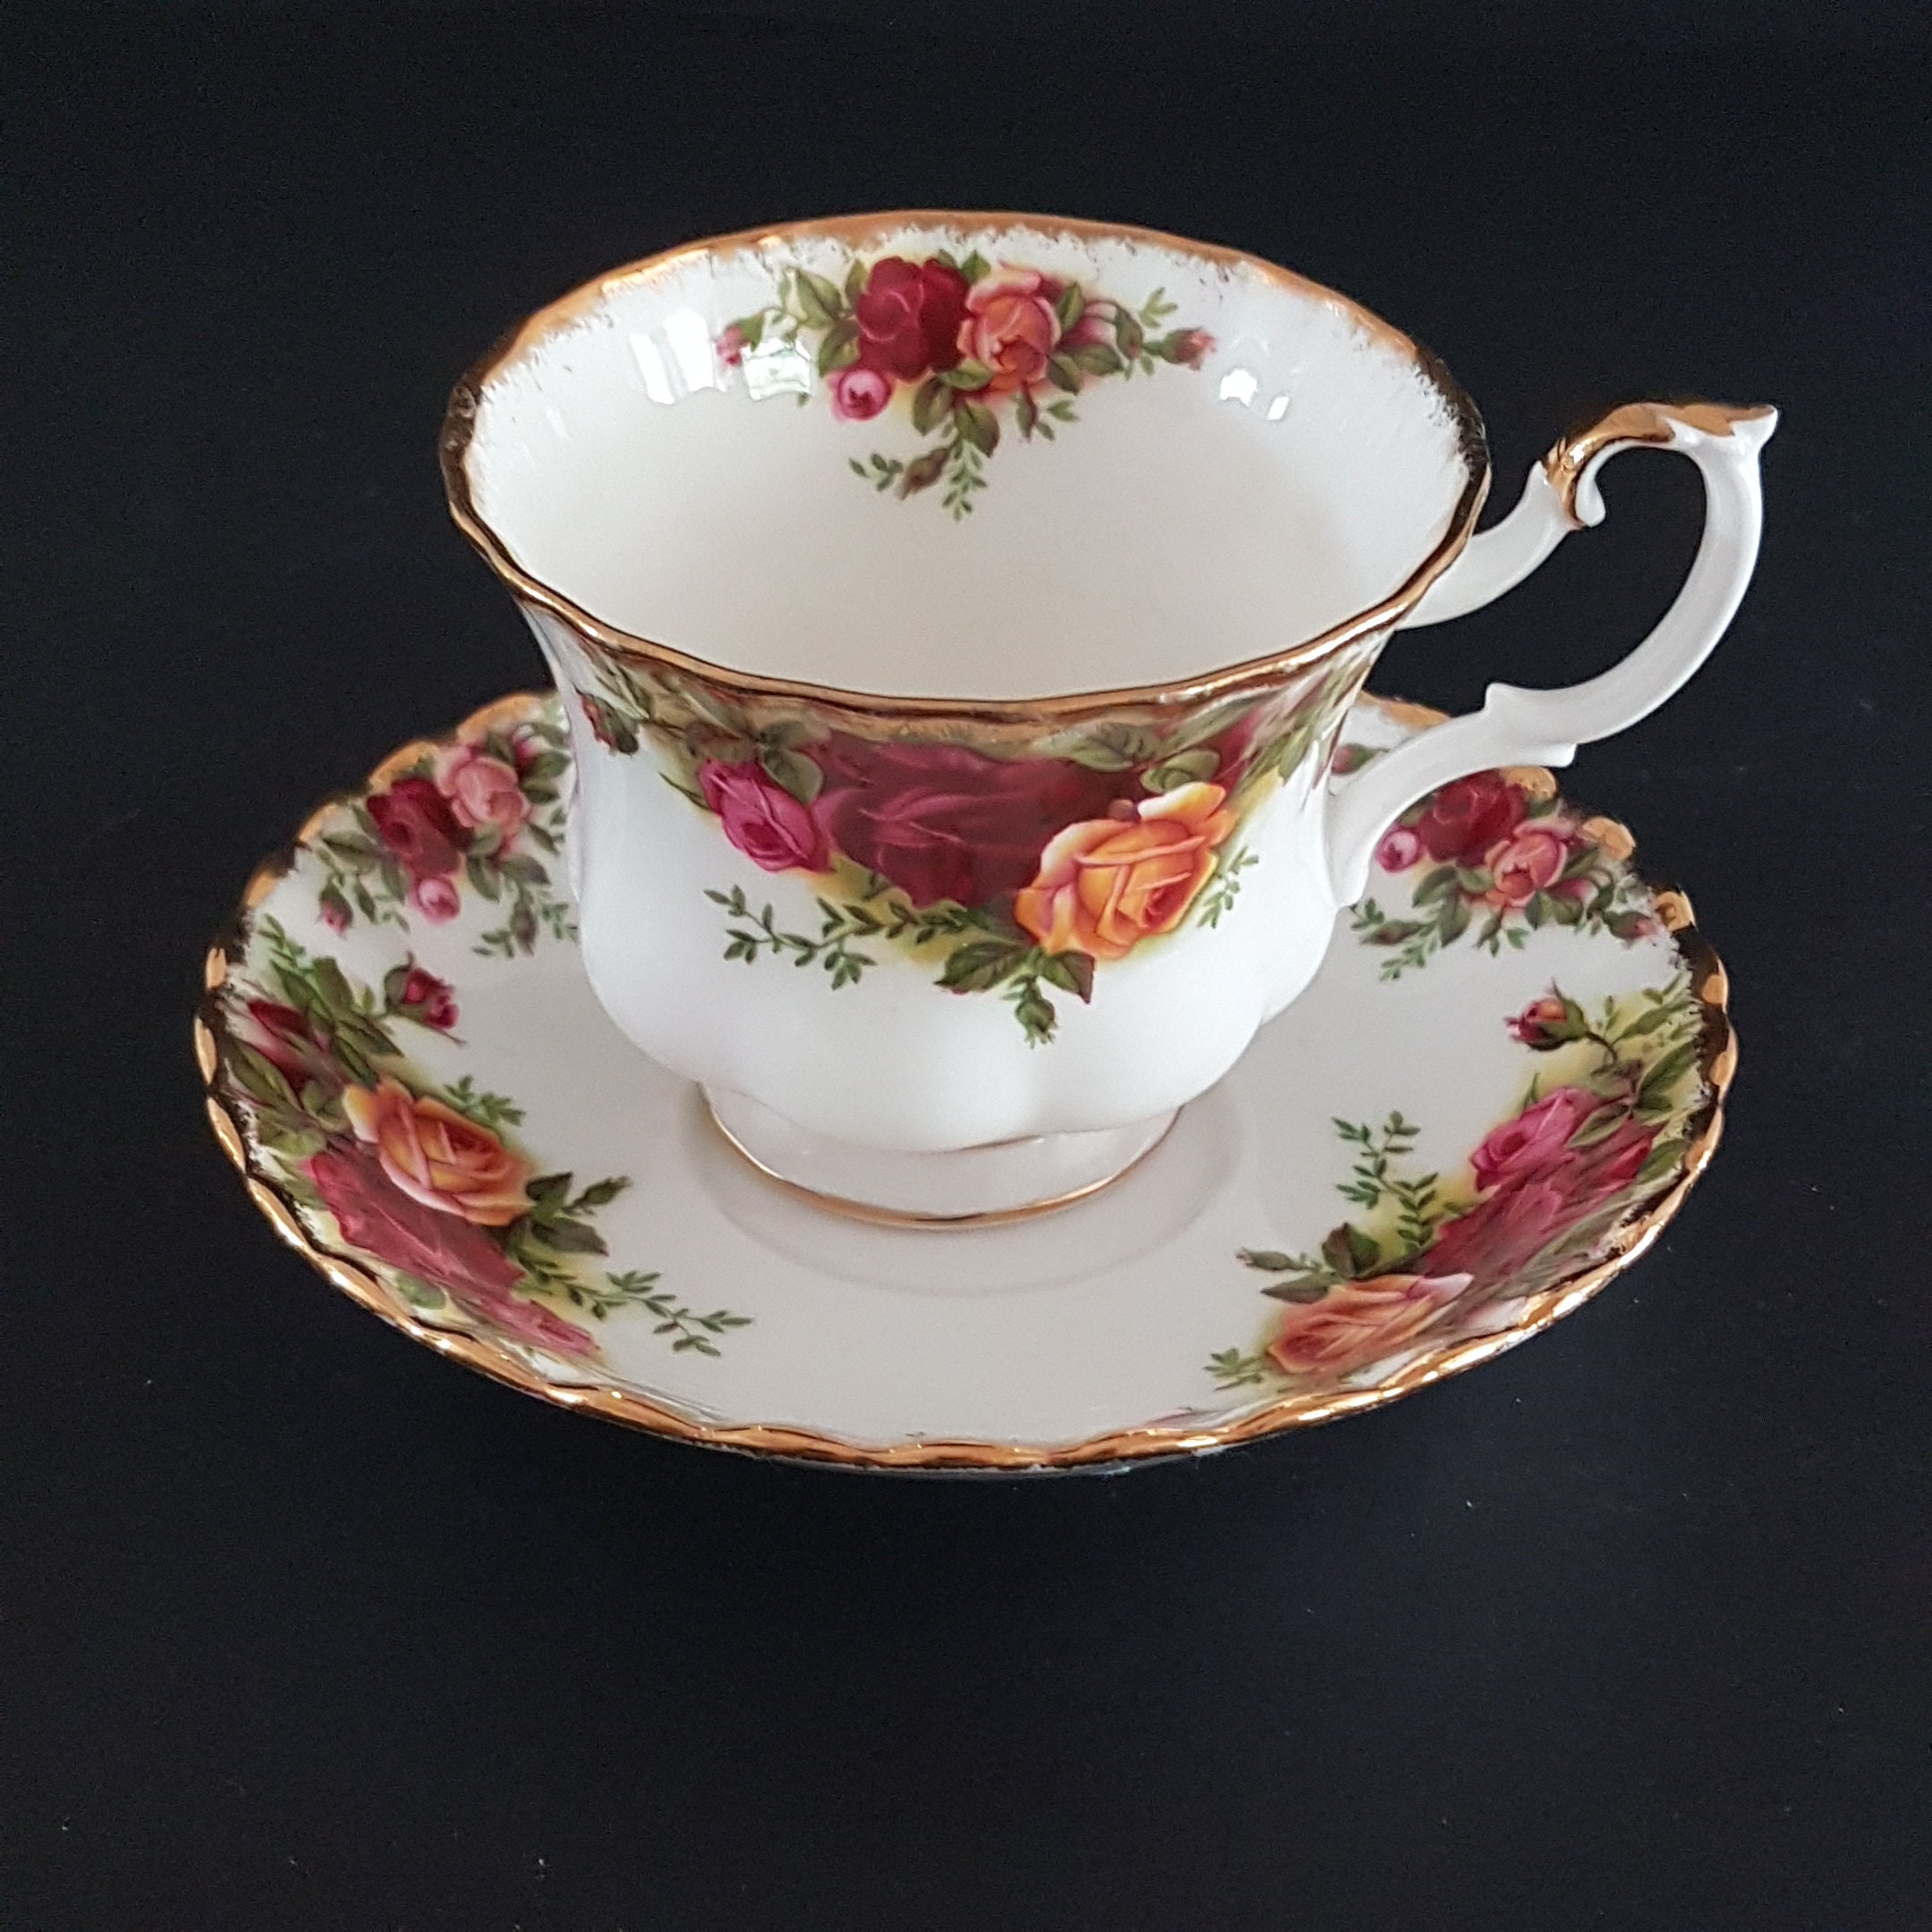 Porcelainchina Footed Tea Cup And Saucer Set Bone China 1 Royal Albert Old Country Roses One 